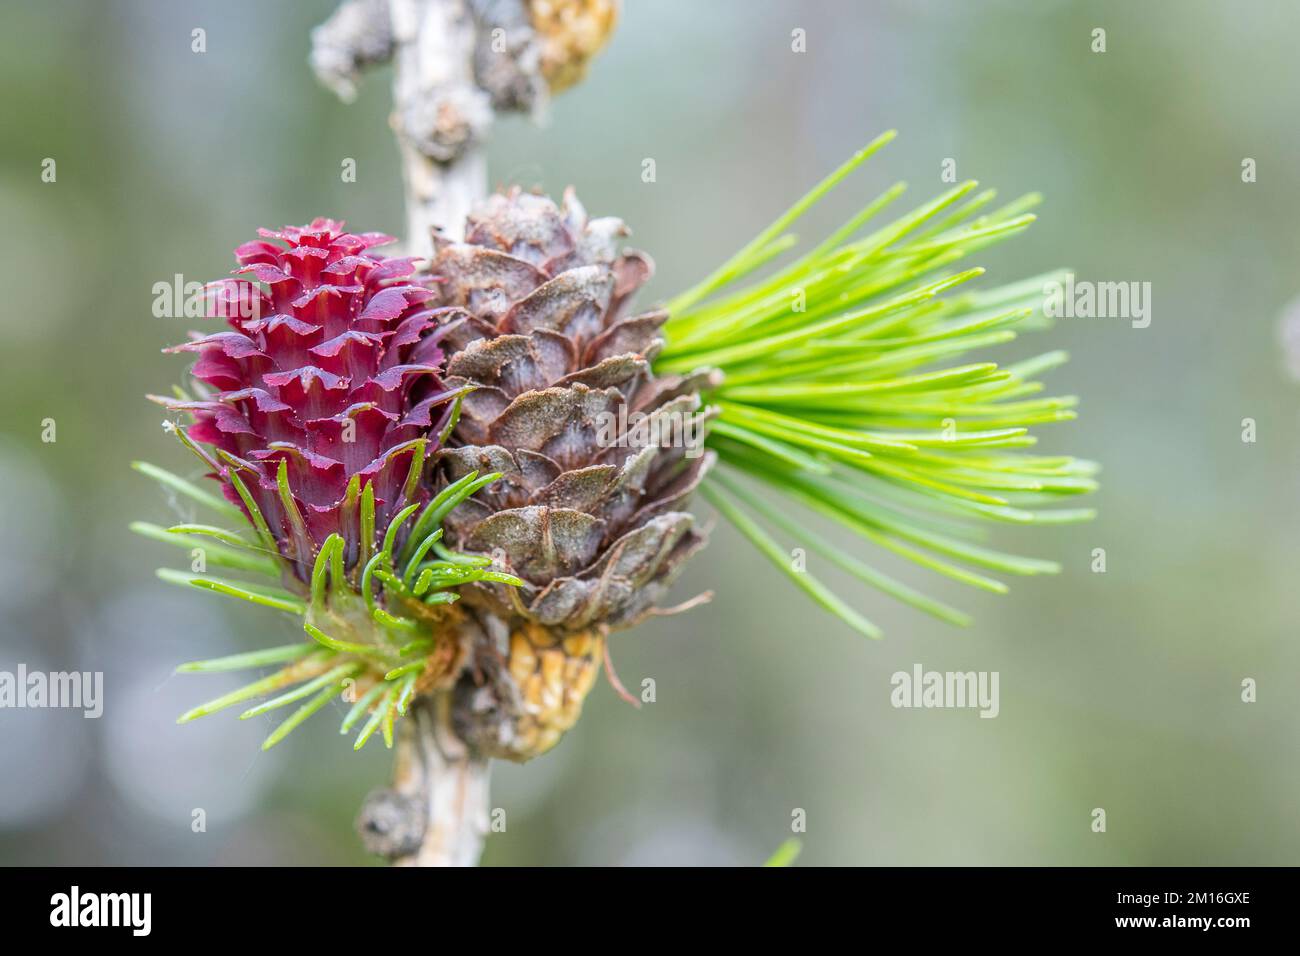 Larix decidua, the European larch, is a species of larch native to the mountains of central Europe, female flower and cone. Stock Photo